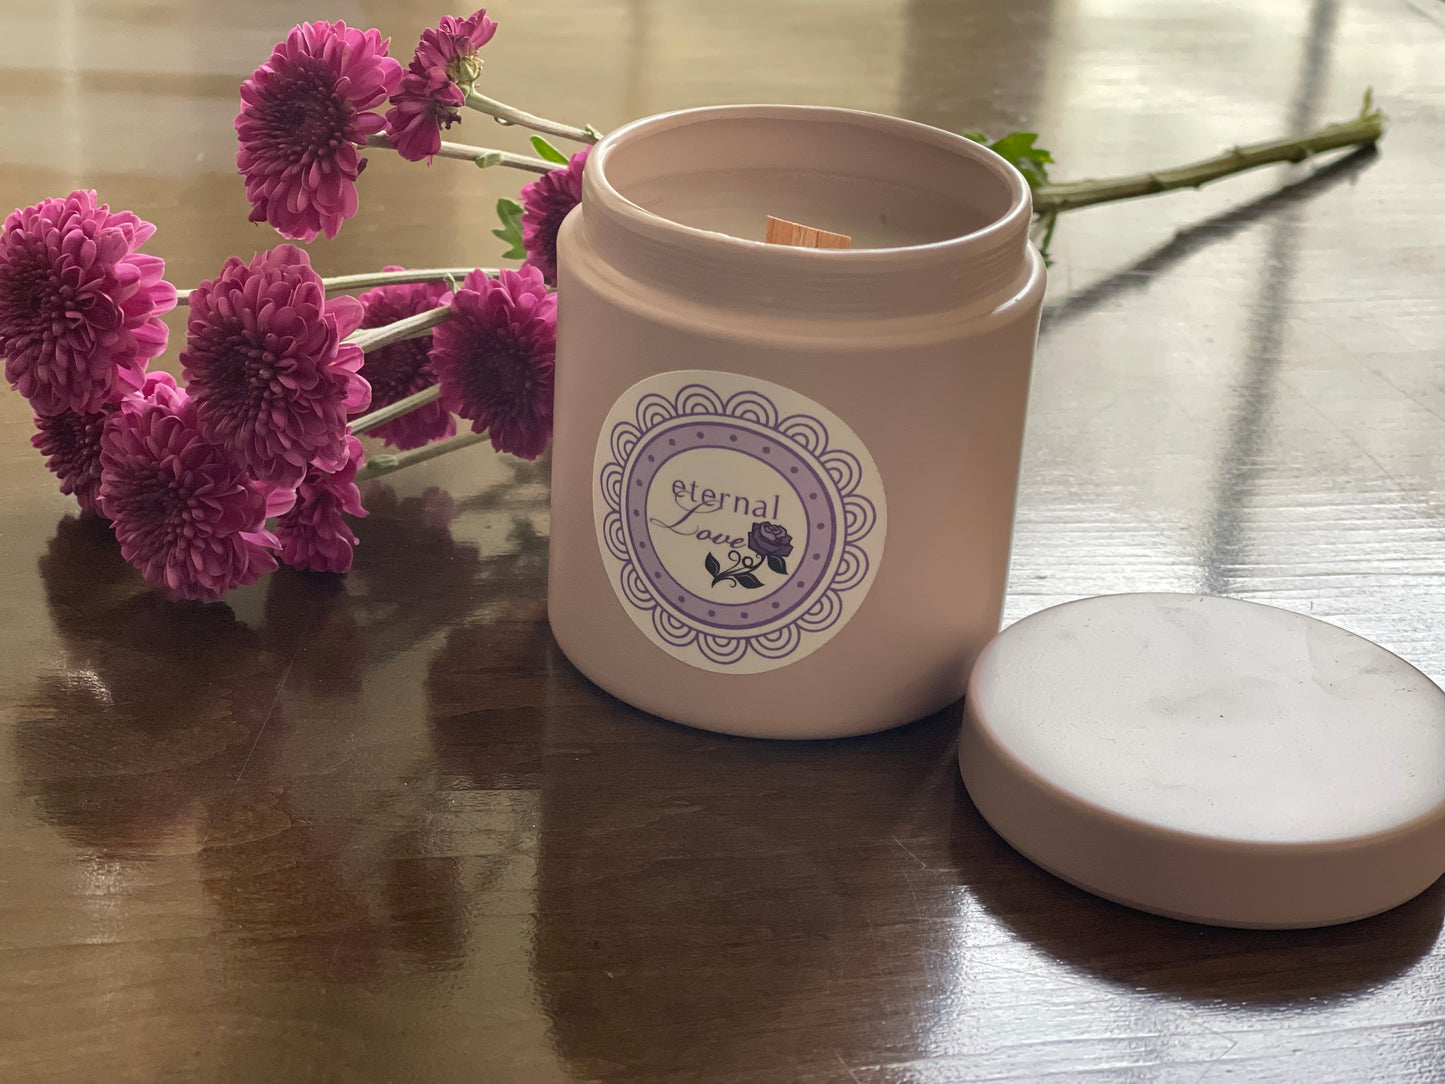 *NEW LOOK!* The Eternal Love Candle